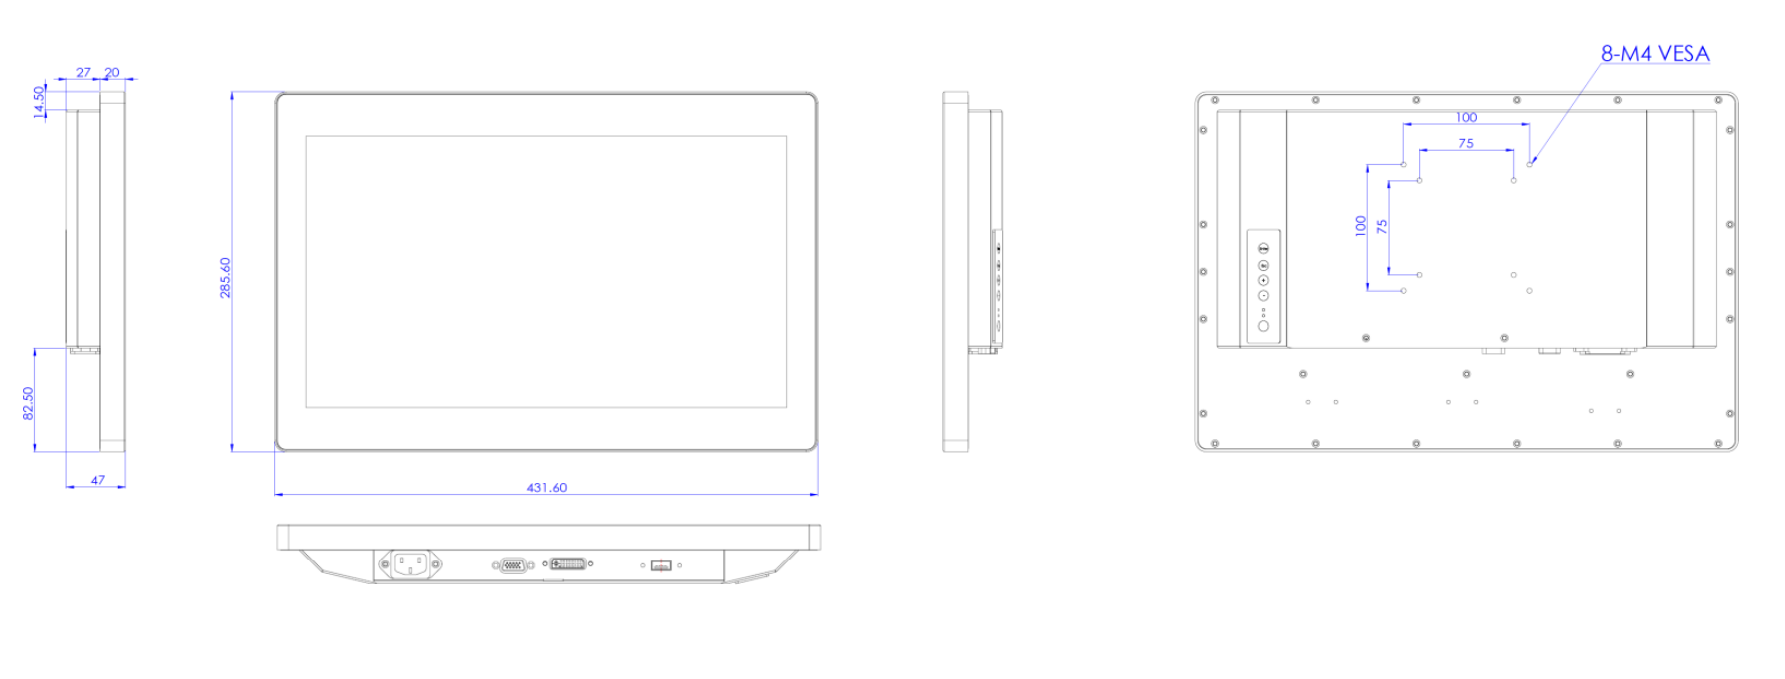 LFS-17W industrial touch monitor- technical drawing